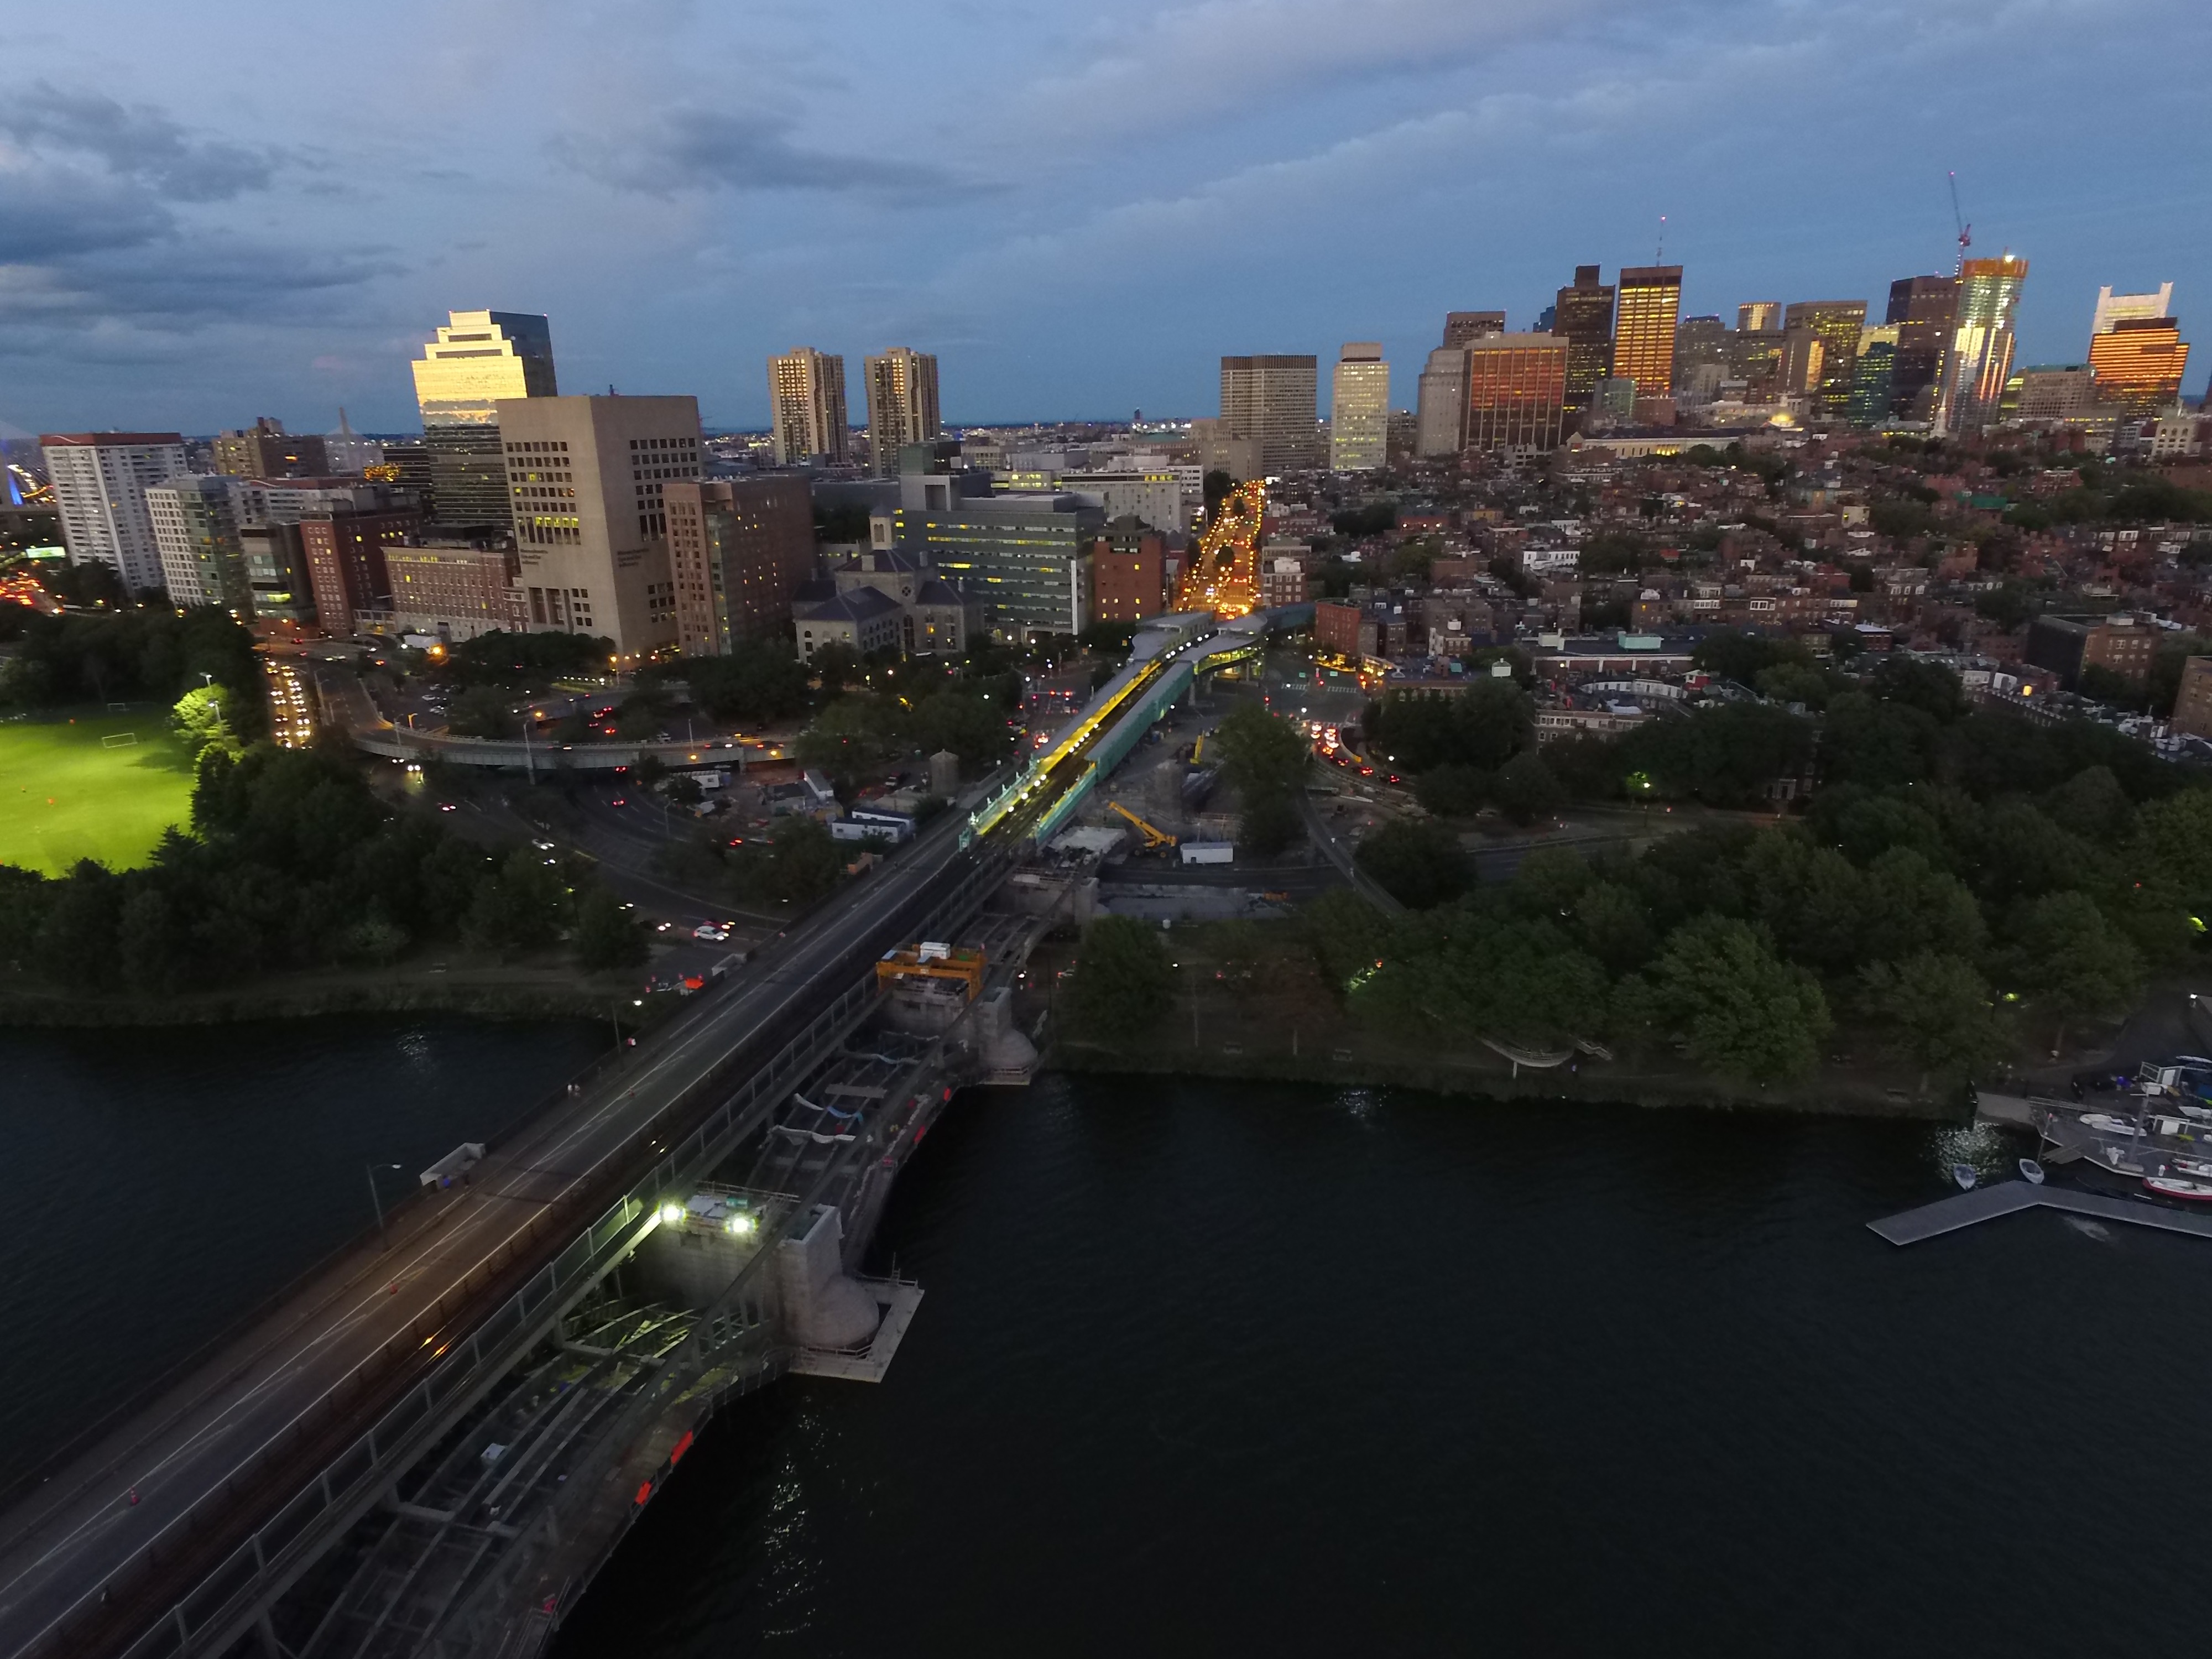 Drone photo of Boston at sunset from over the Charles River